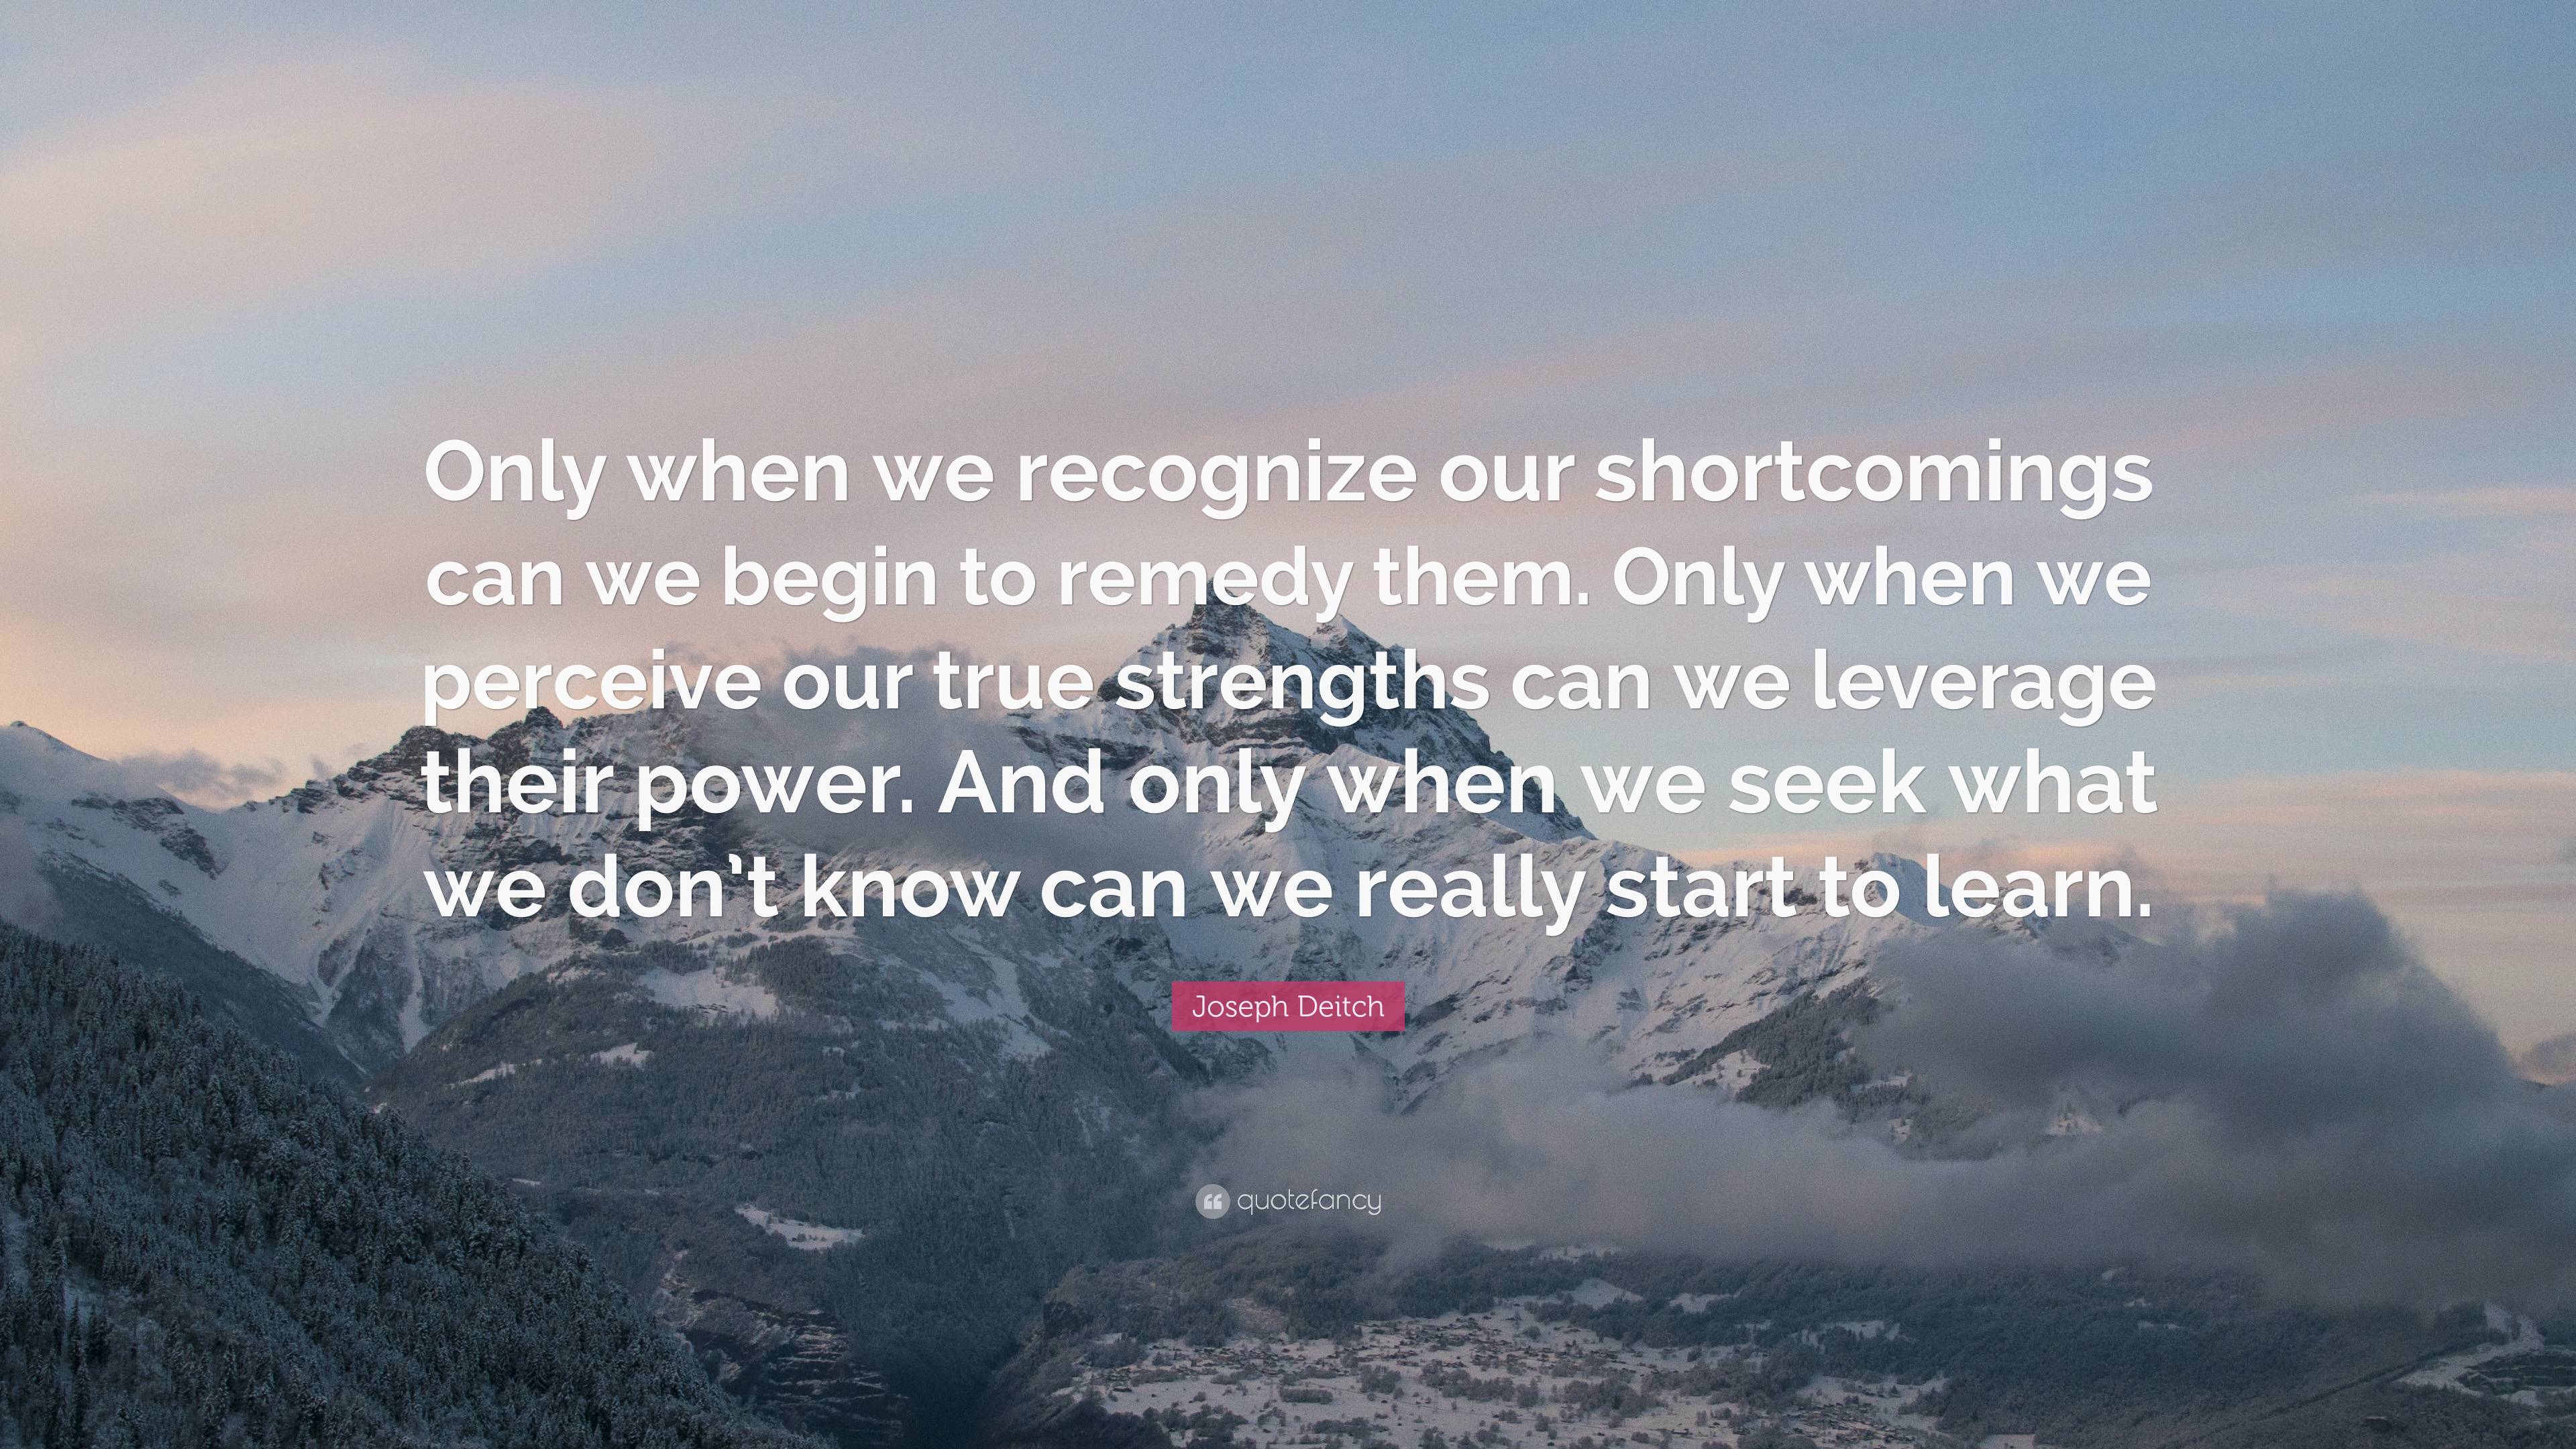 Joseph Deitch Quote: “Only when we recognize our shortcomings can we ...